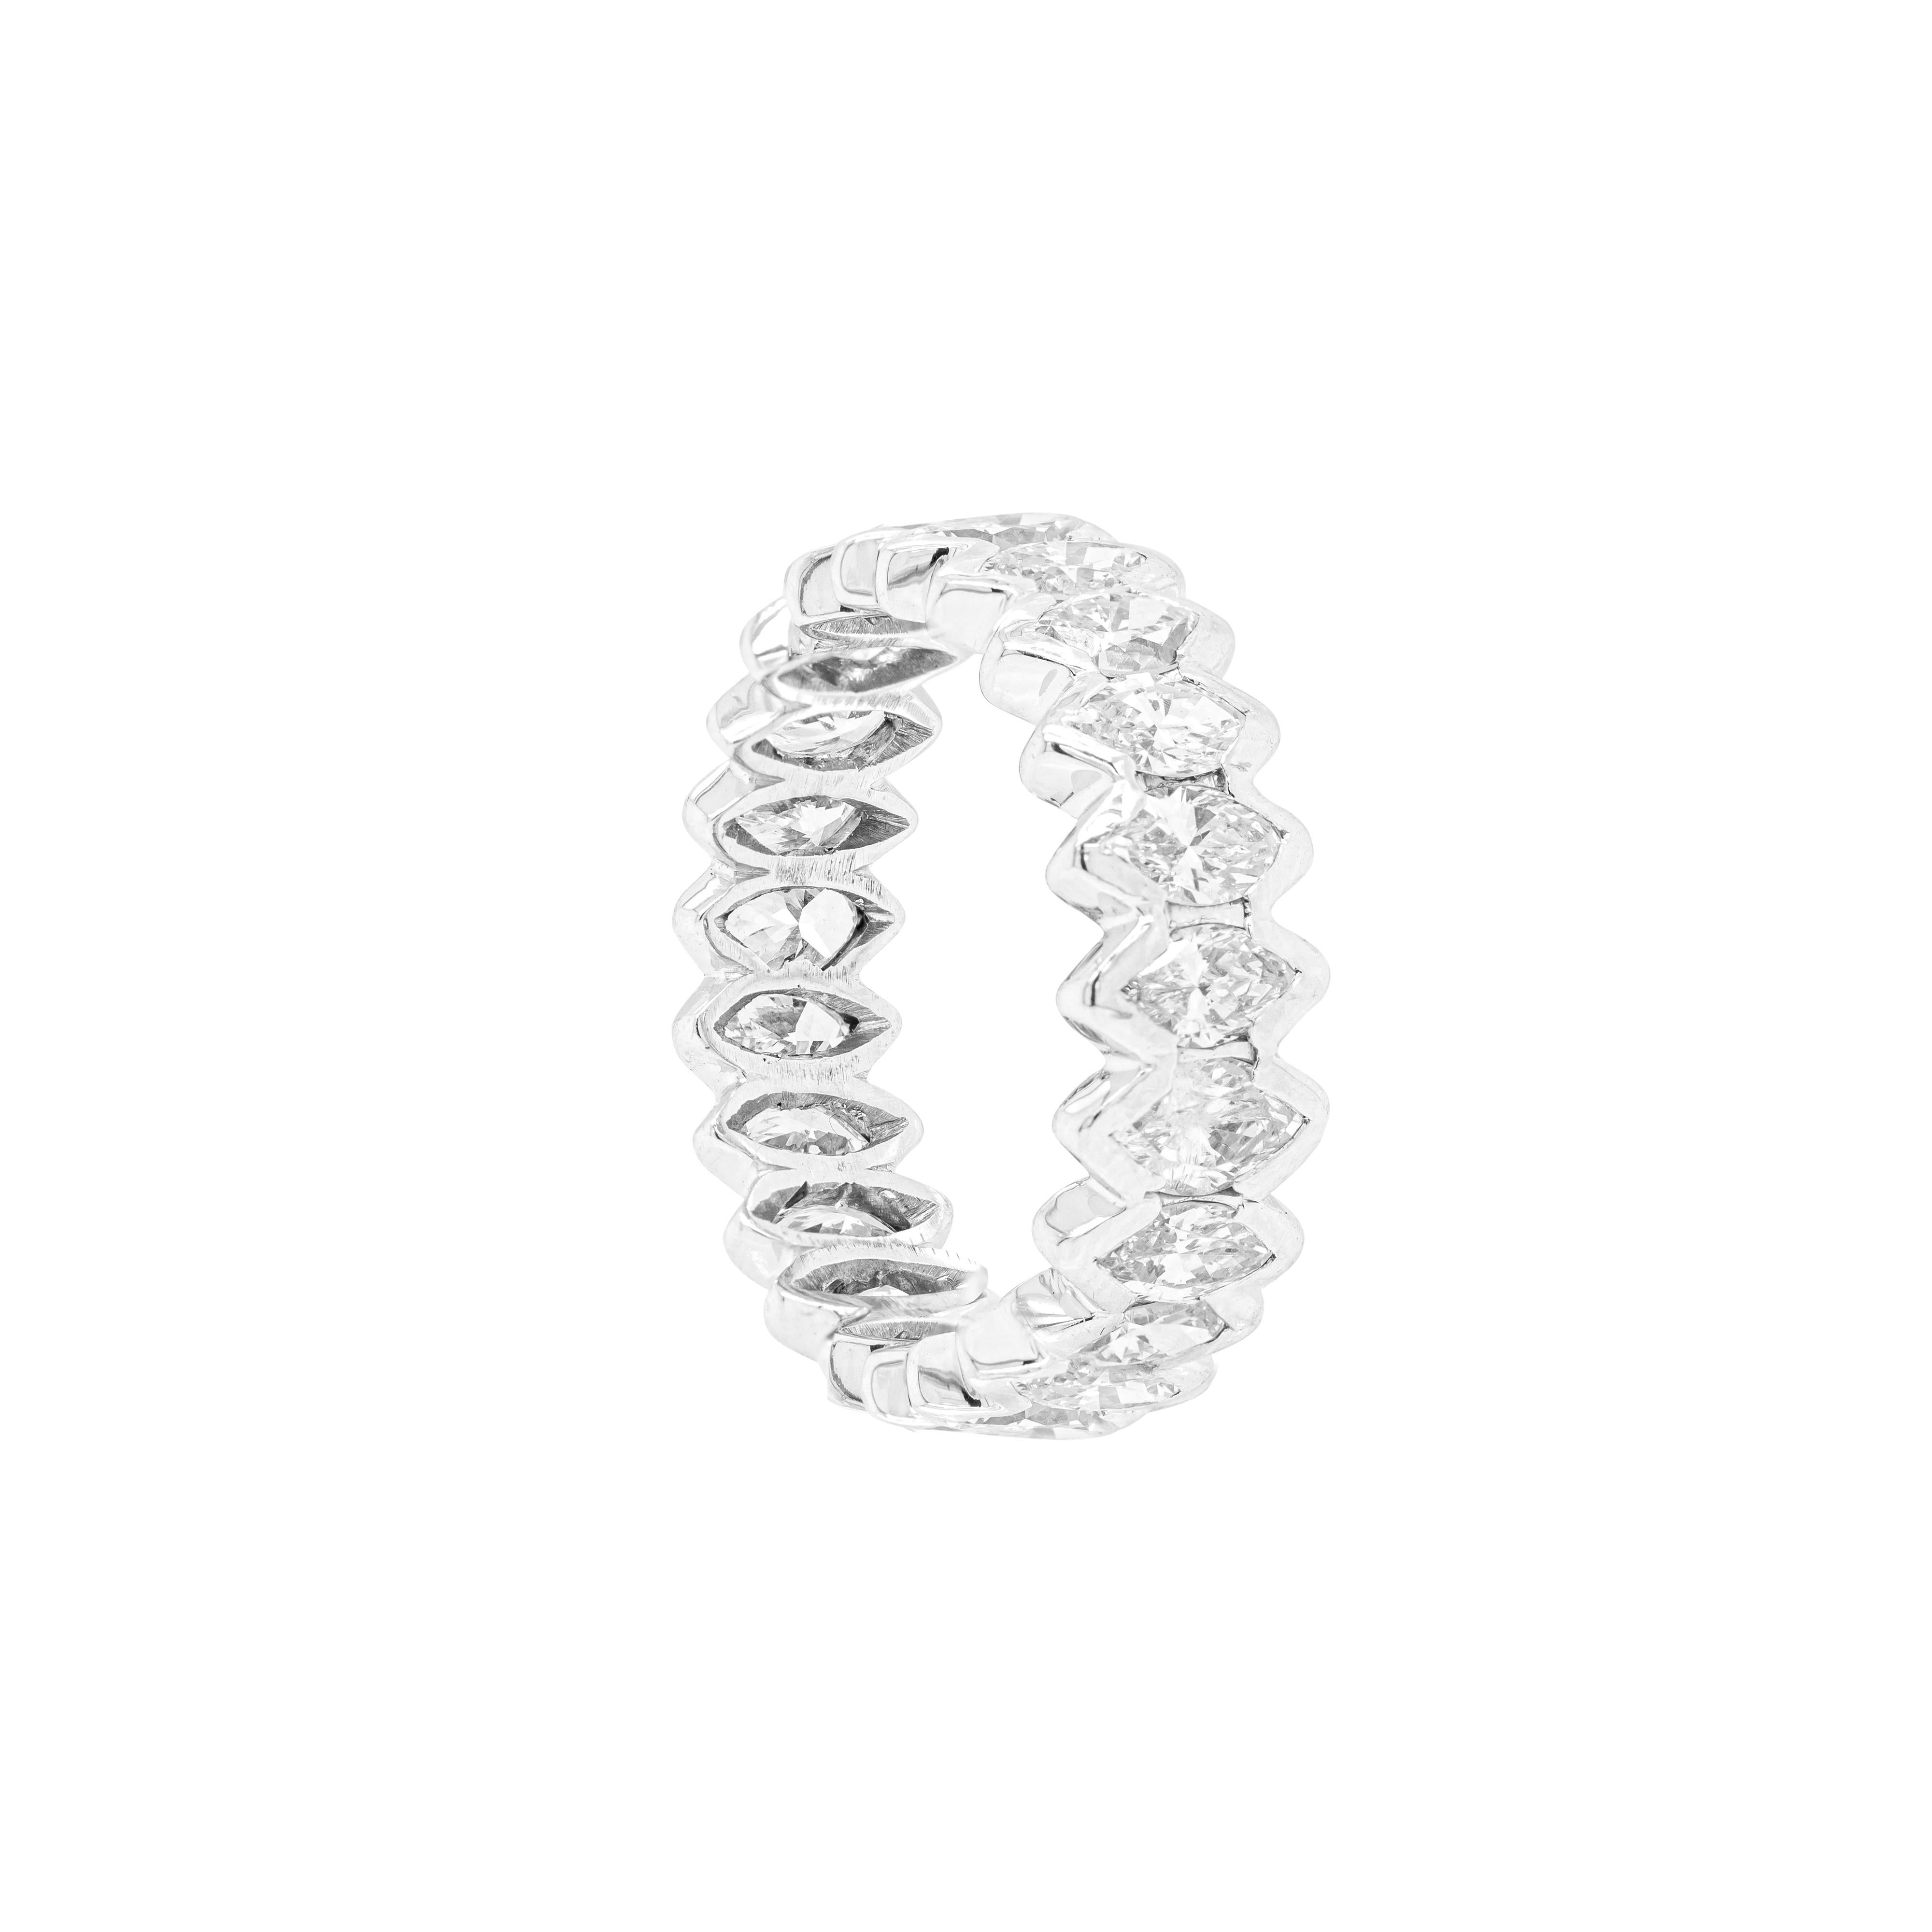 This handmade eternity ring features 22 marquise shaped diamonds set in rub-over, open back settings, with a total approximate weight of 2.50ct, all mounted in 18 carat white gold. The ring weighs 5.7 grams and measures 7.2mm in width. UK finger